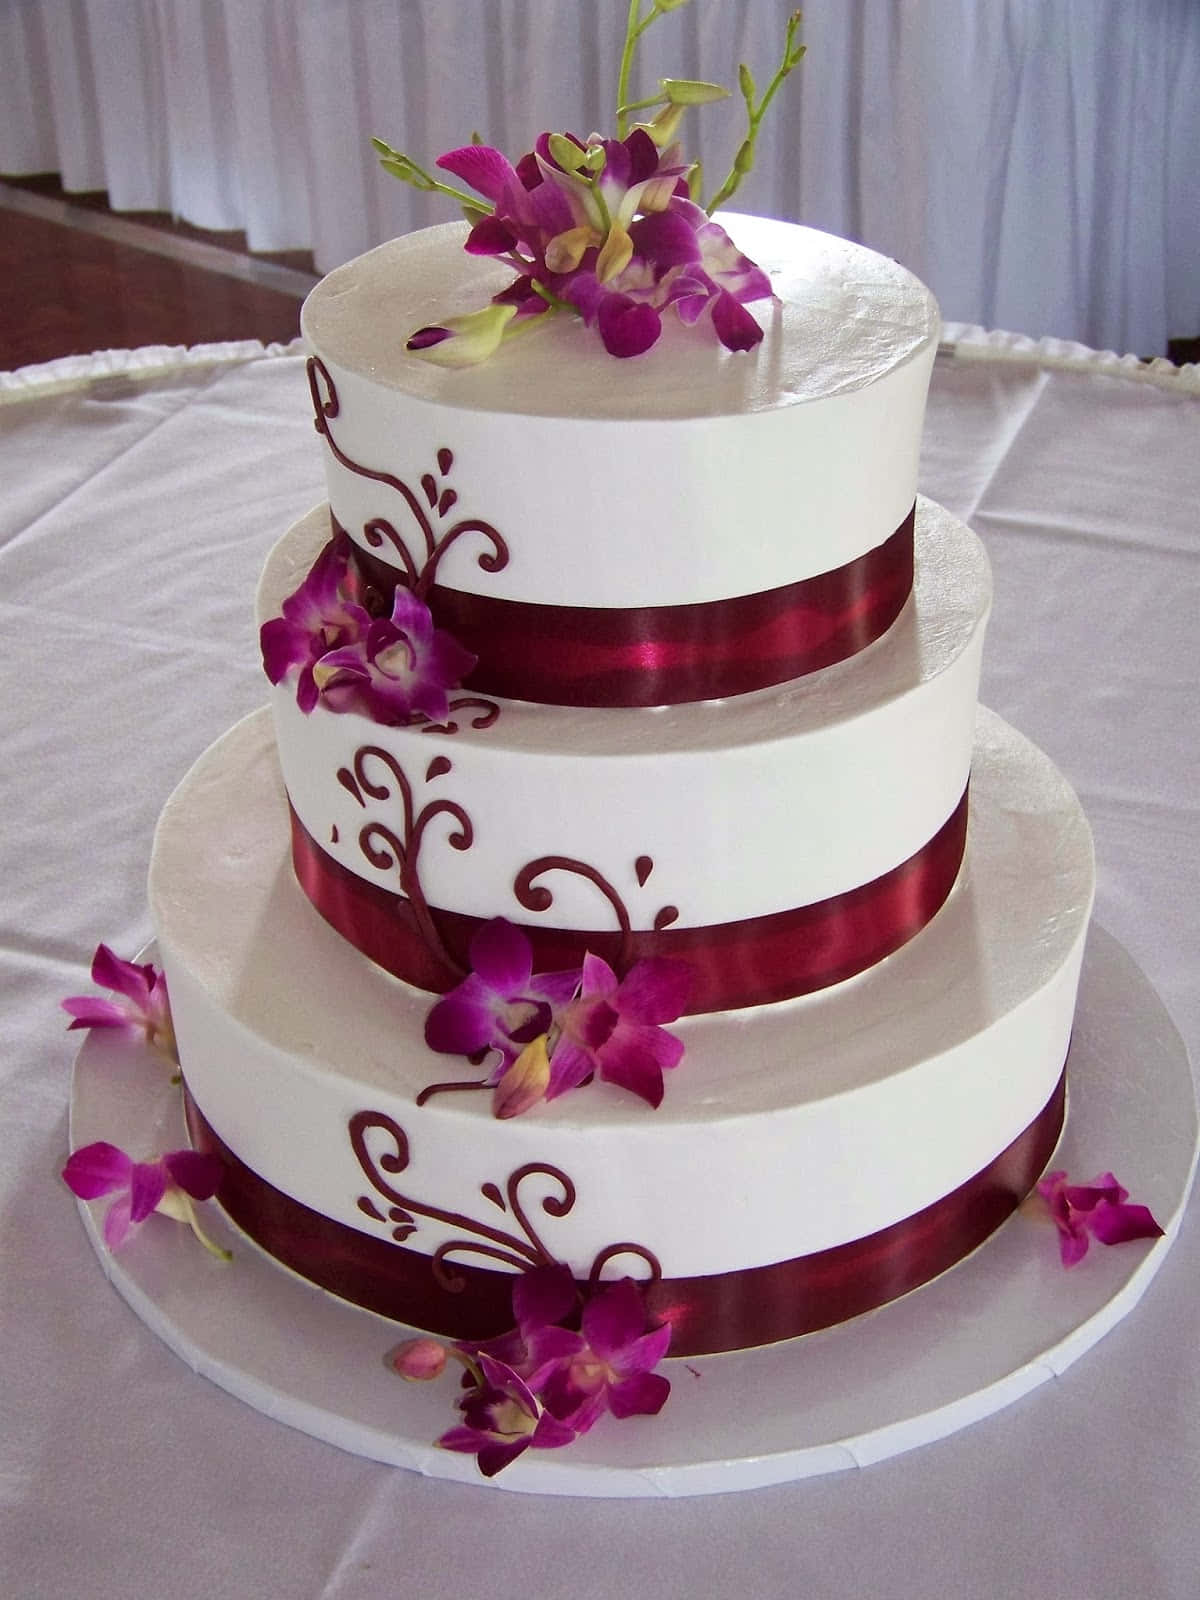 A White Cake With Purple Flowers On Top